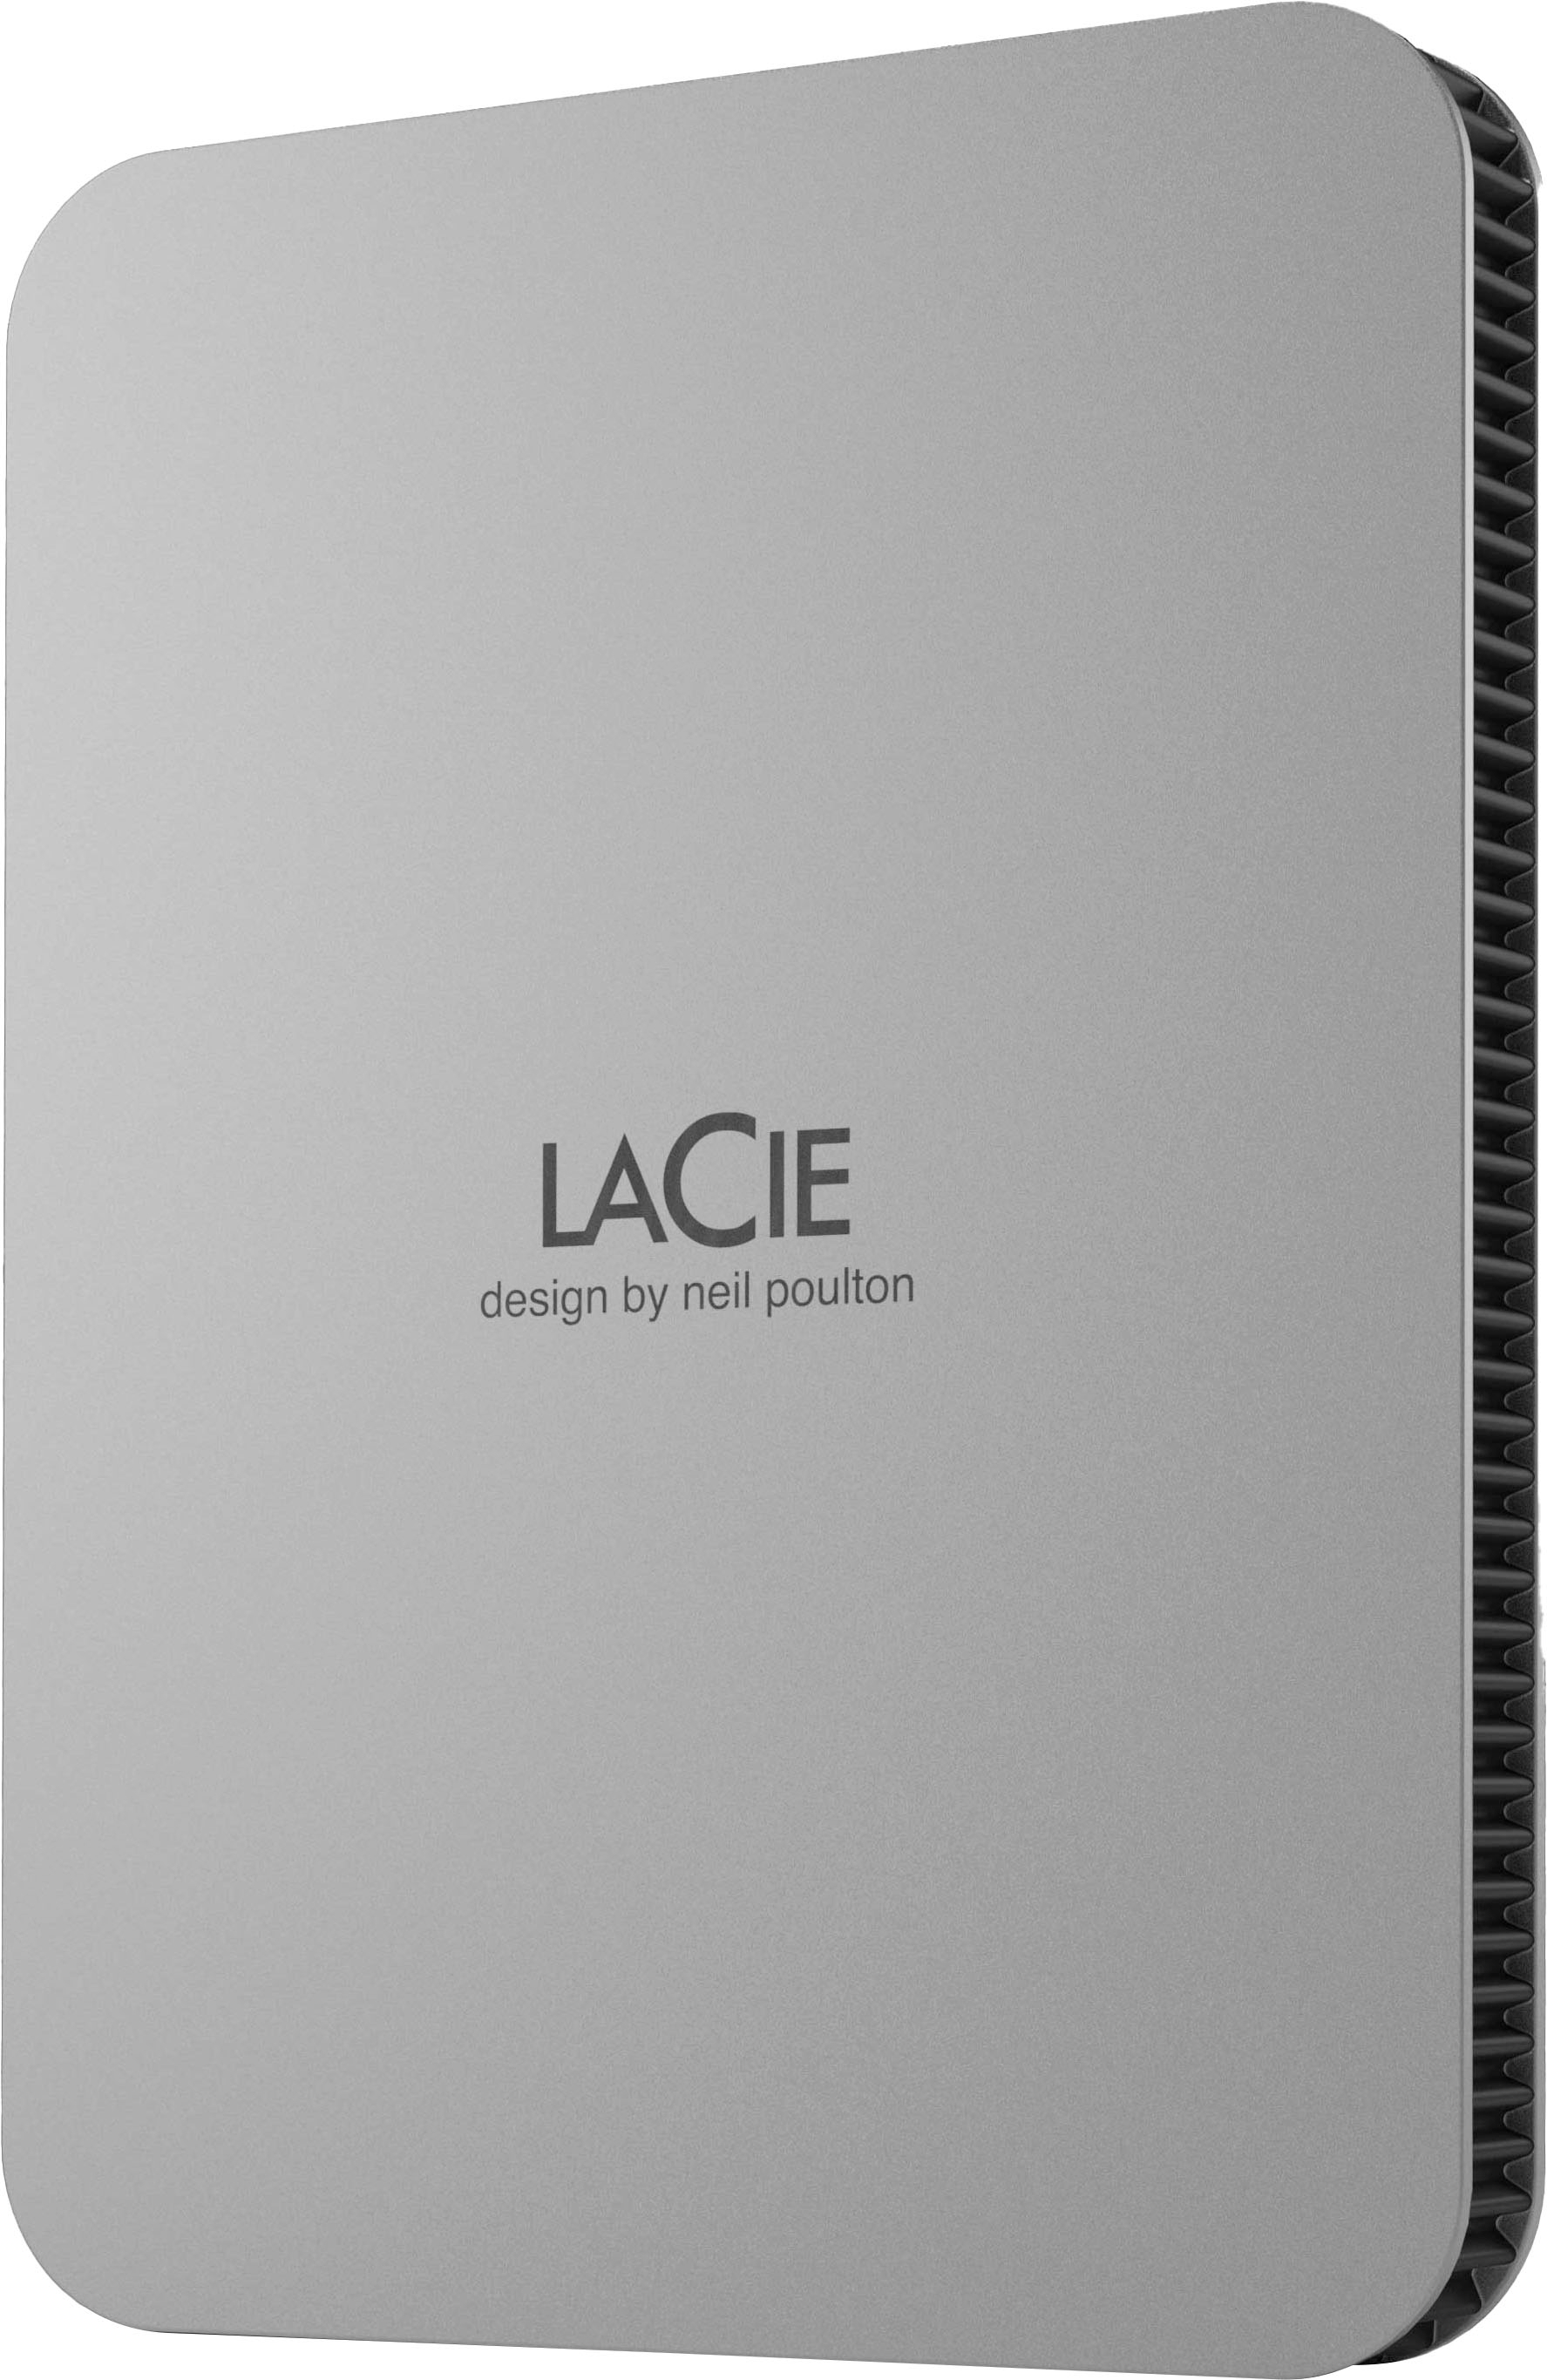 LaCie 500GB Mobile SSD Secure USB-C Drive - Gray - Apple